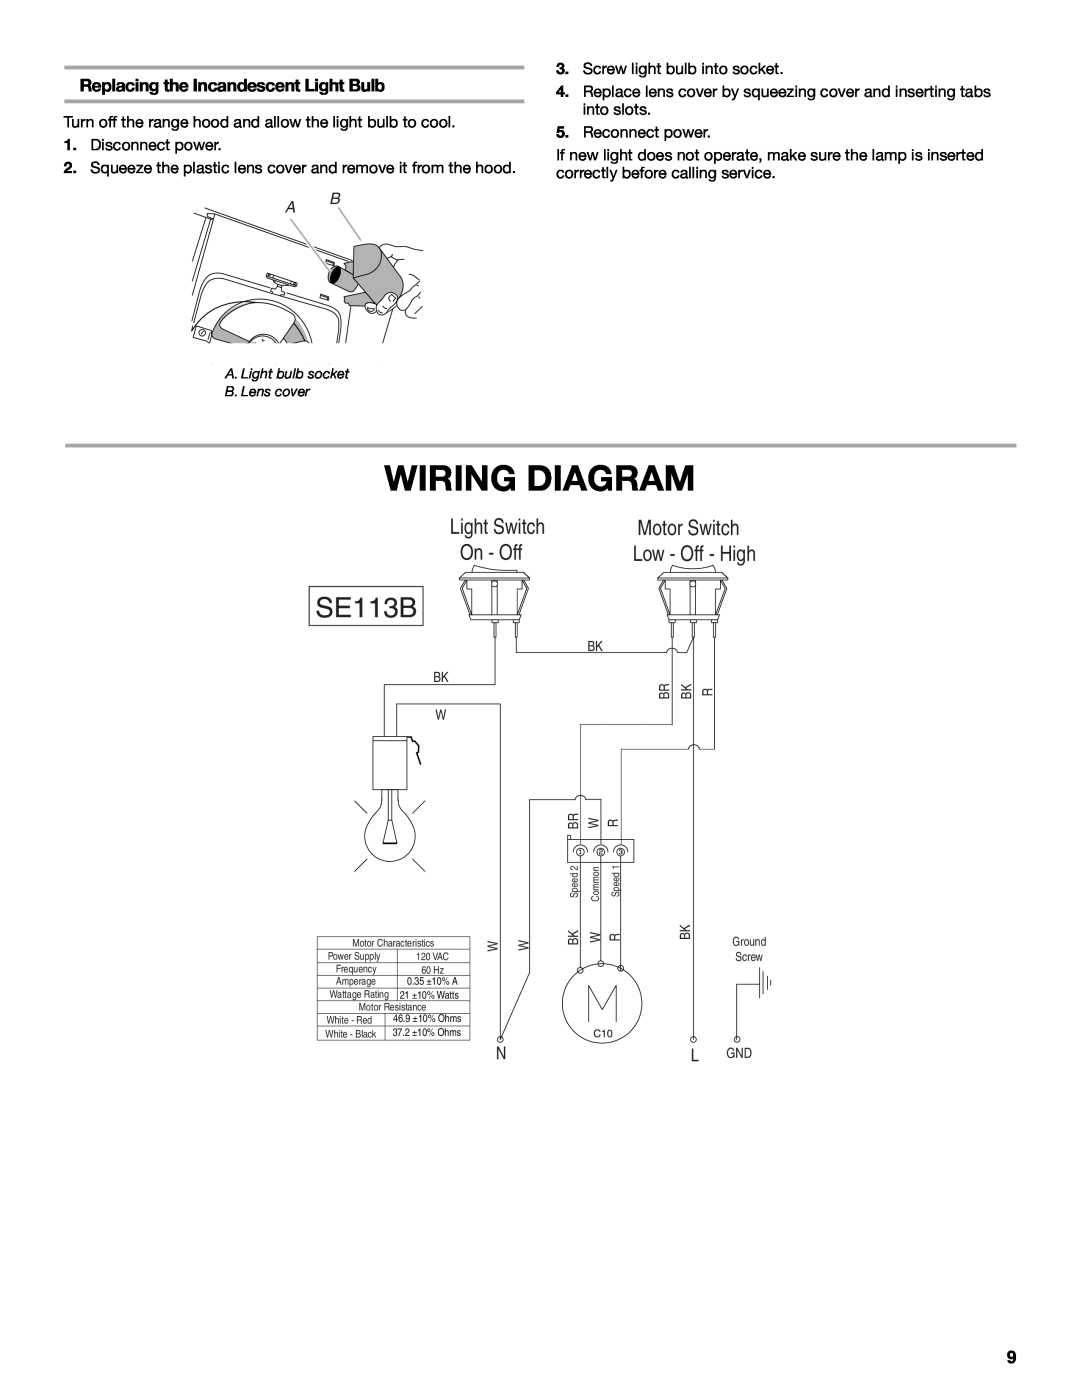 Whirlpool UXT4036AY Wiring Diagram, Motor Switch, Replacing the Incandescent Light Bulb, Low - Off - High, SE113B 